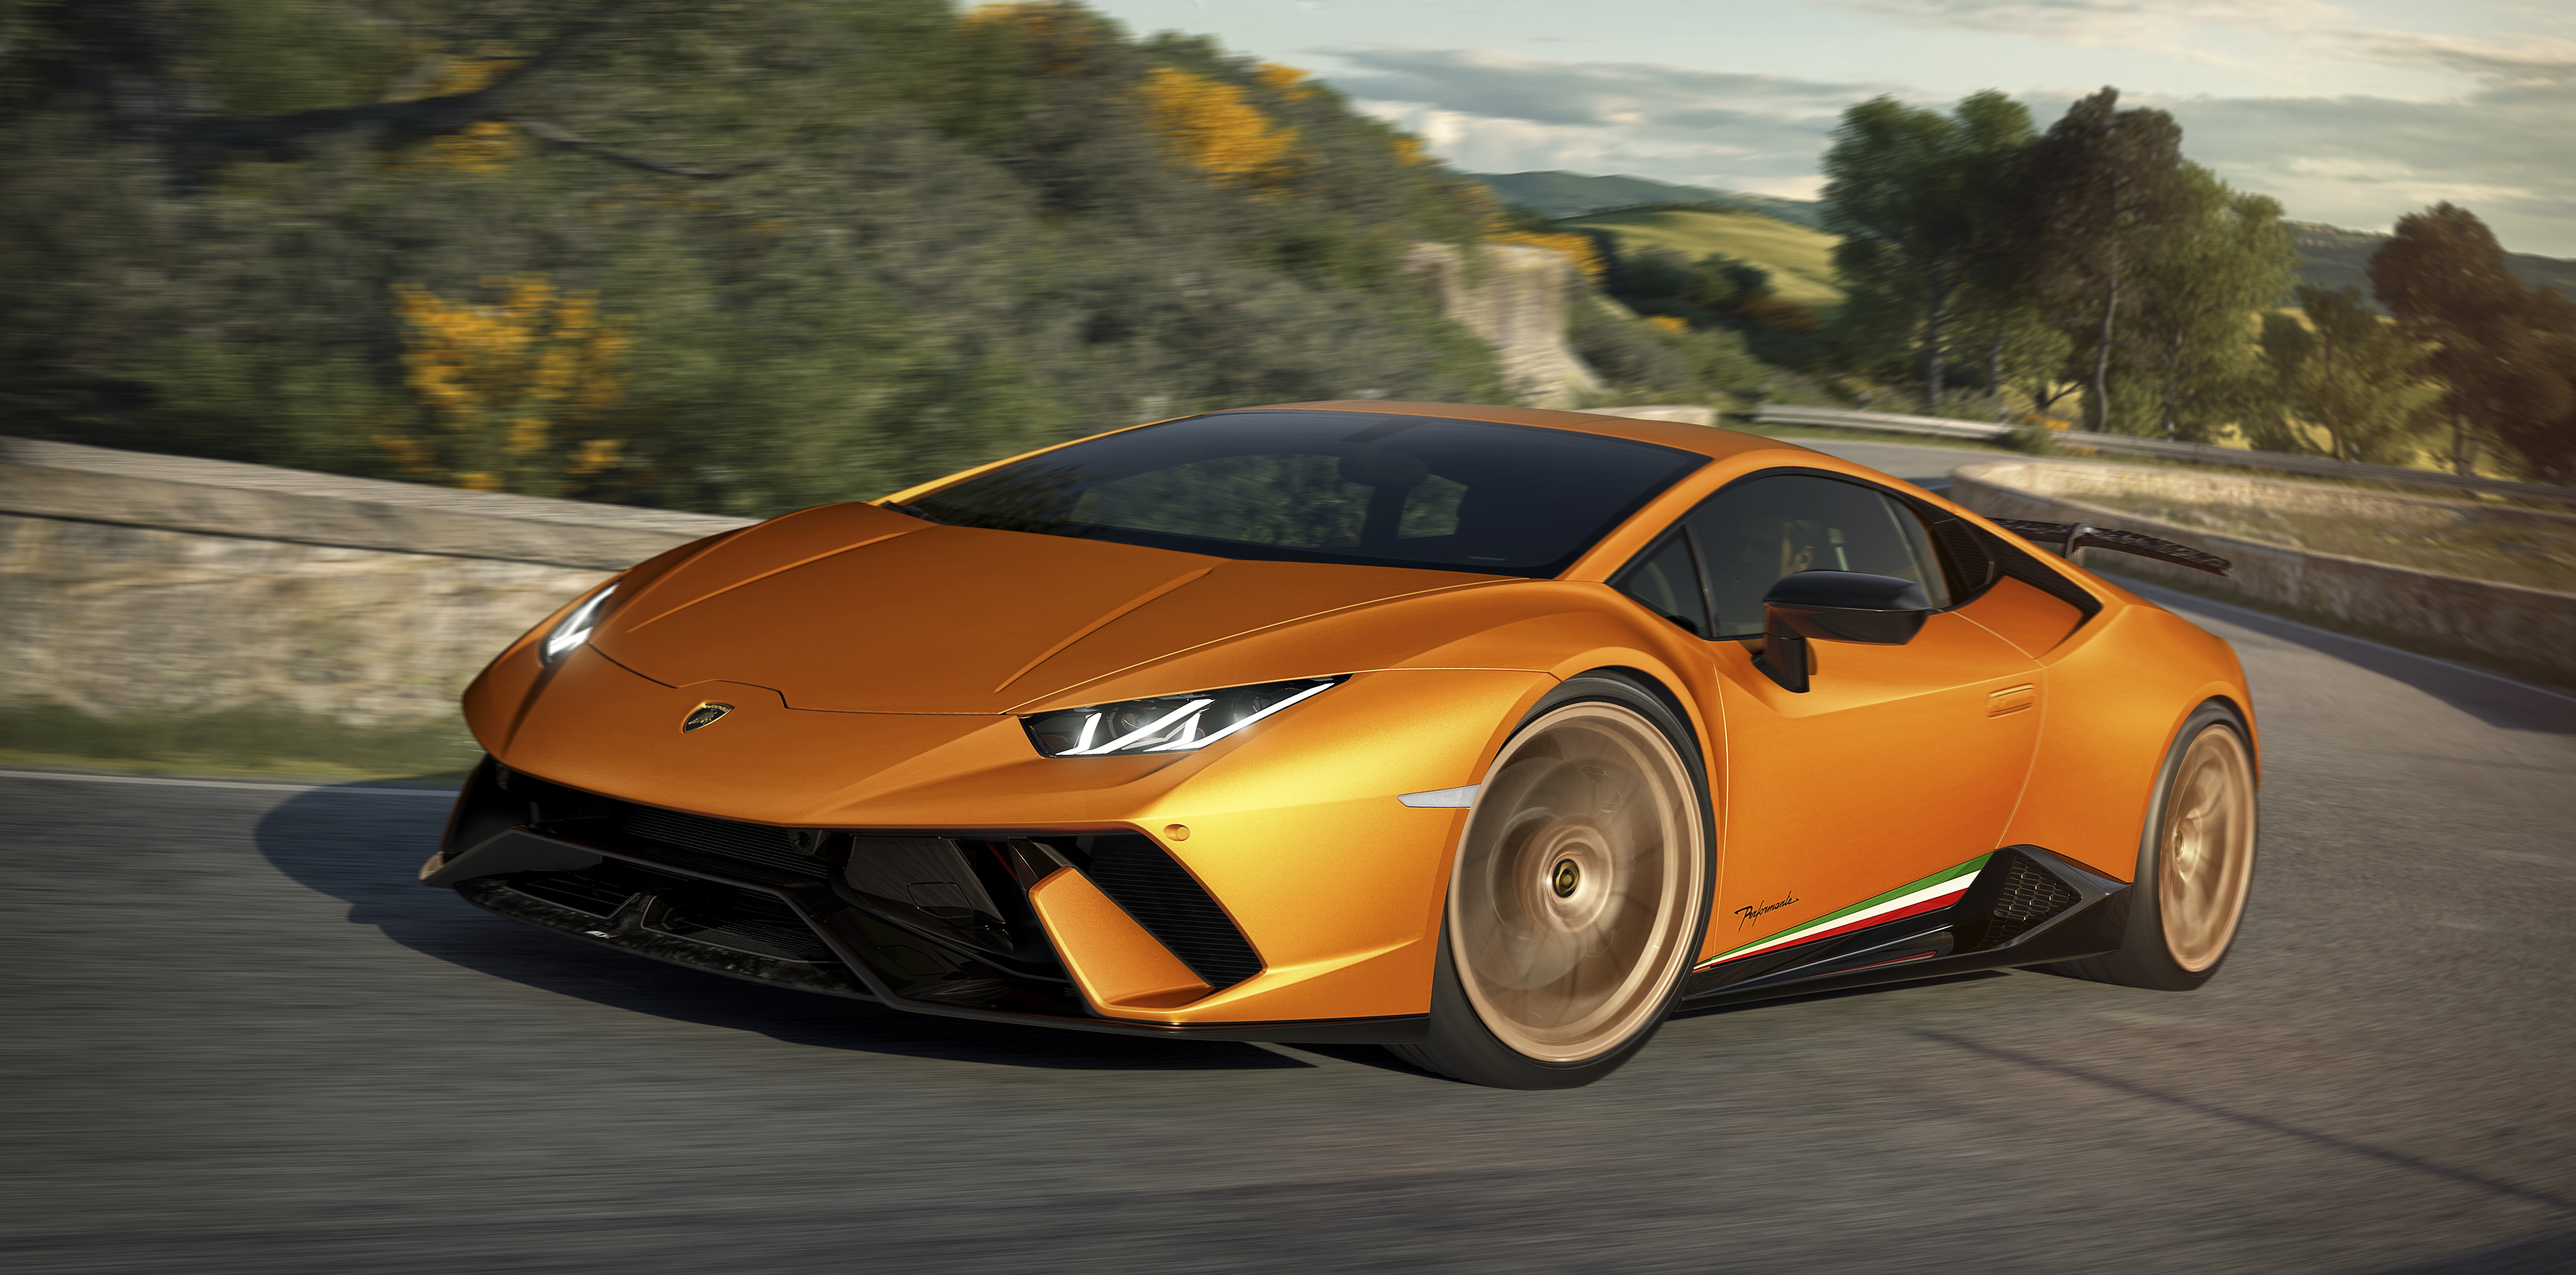 This Lamborghini is the fastest production car ever to lap ...